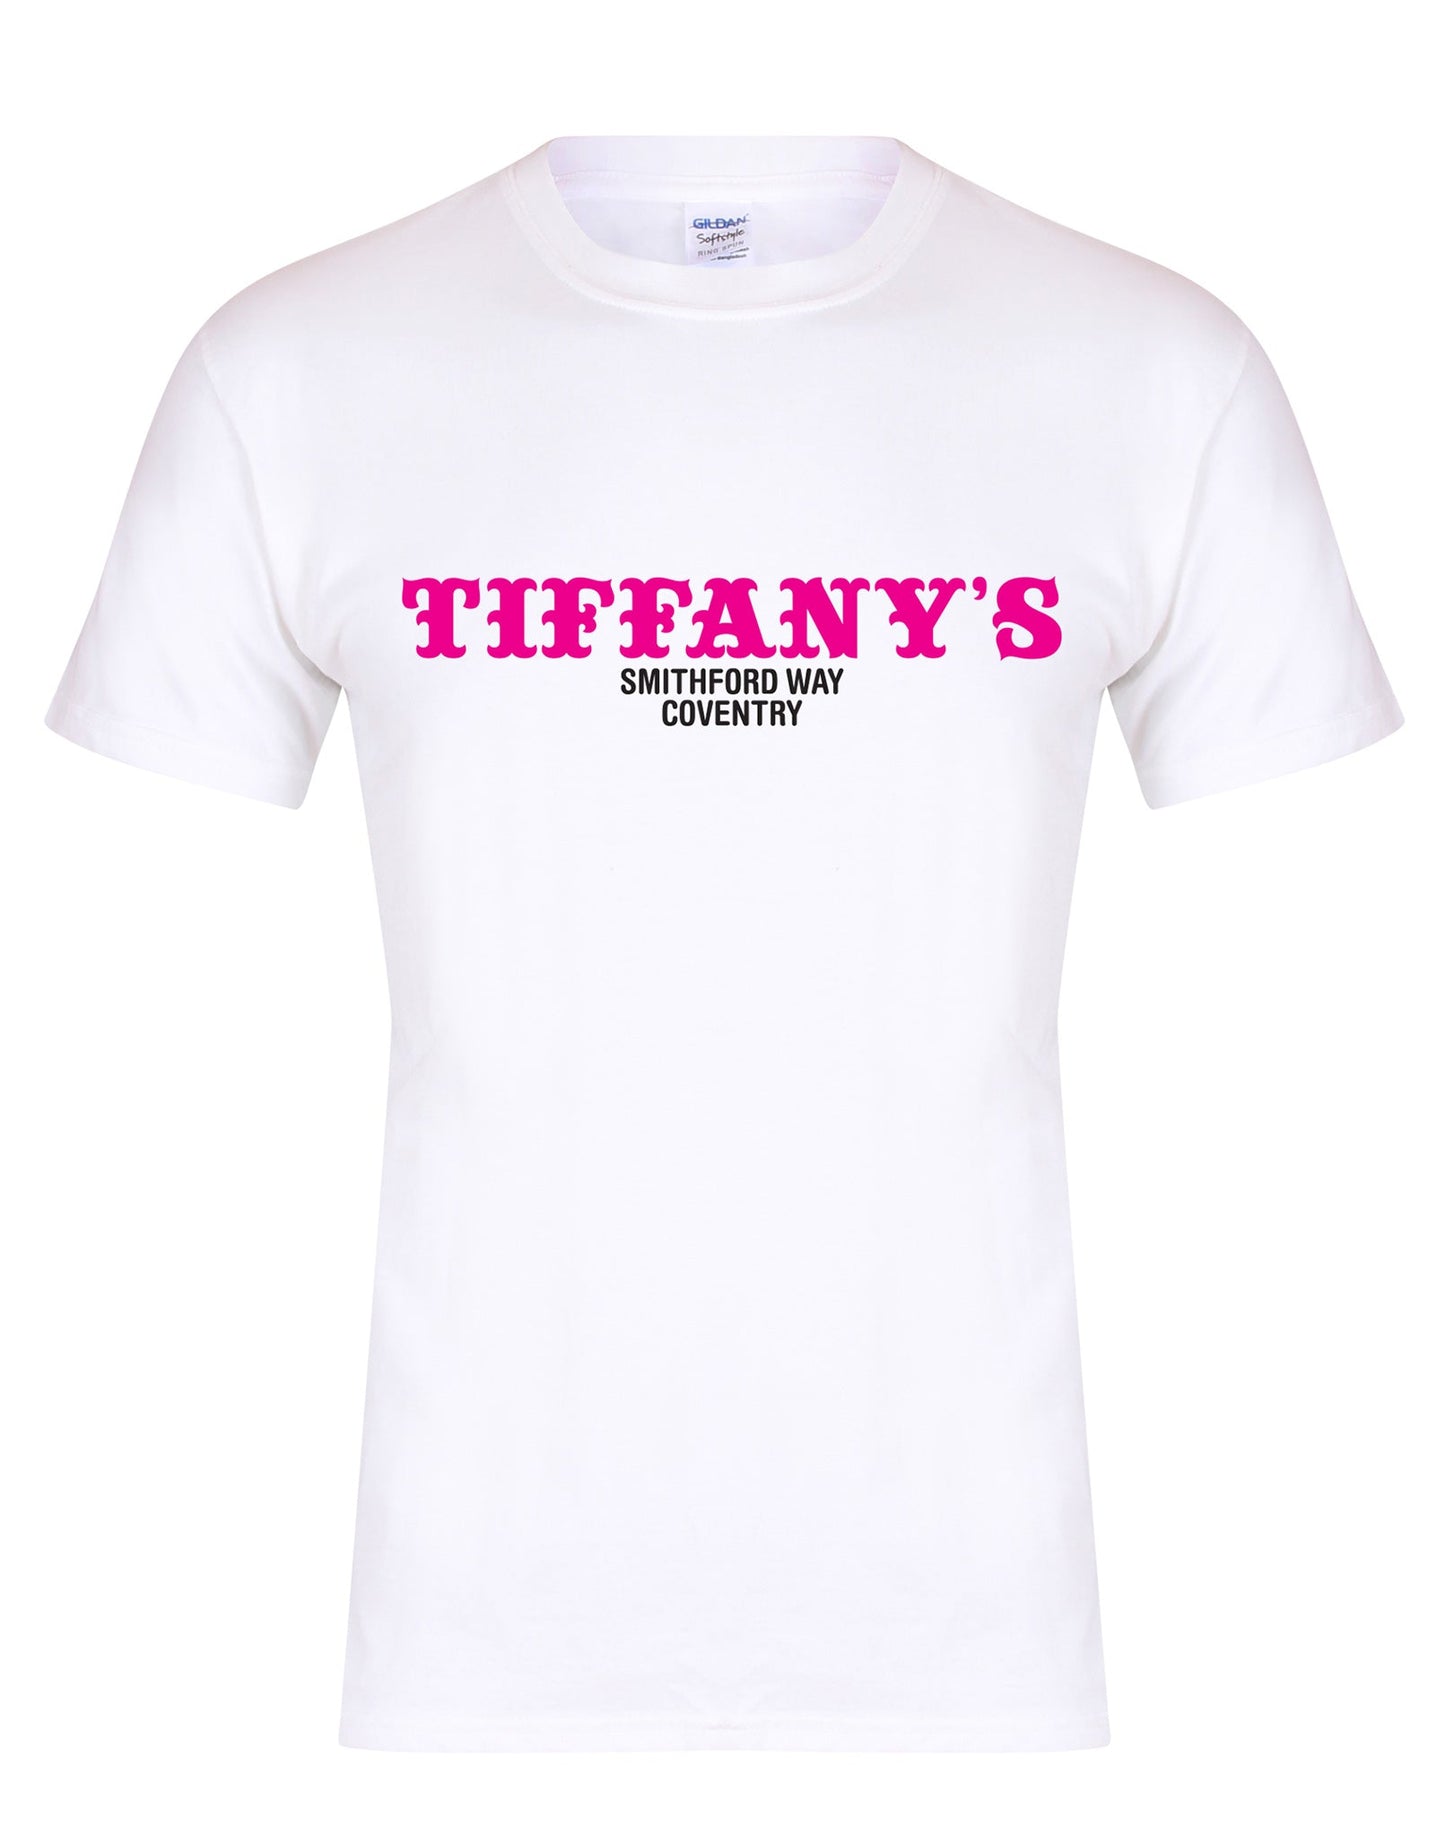 Tiffany's Coventry unisex T-shirt - various colours - Dirty Stop Outs